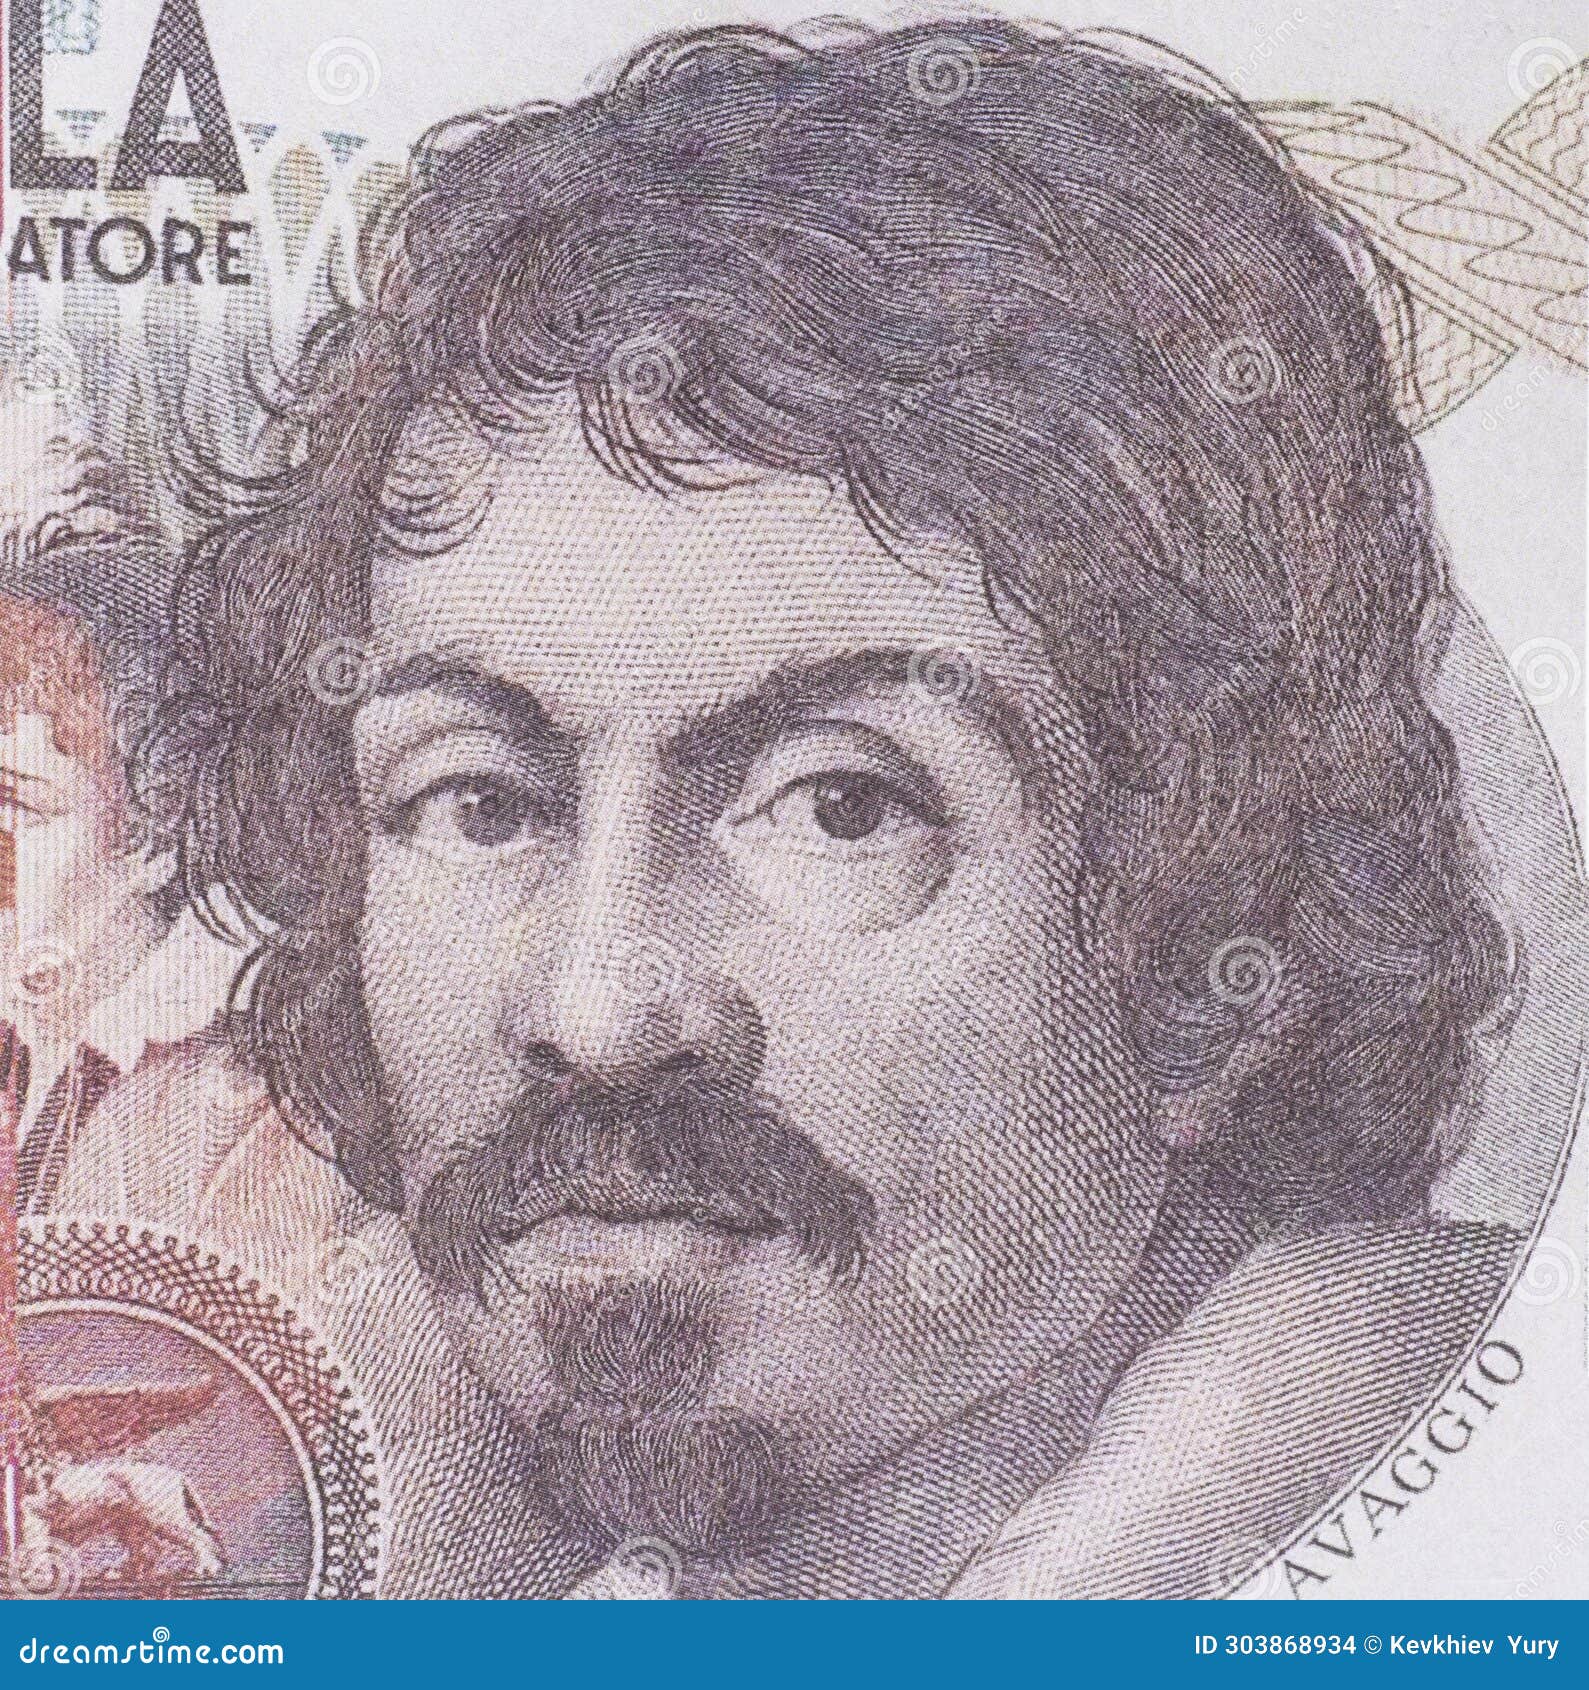 caravaggio portrait from italy 100000 lire banknotes.